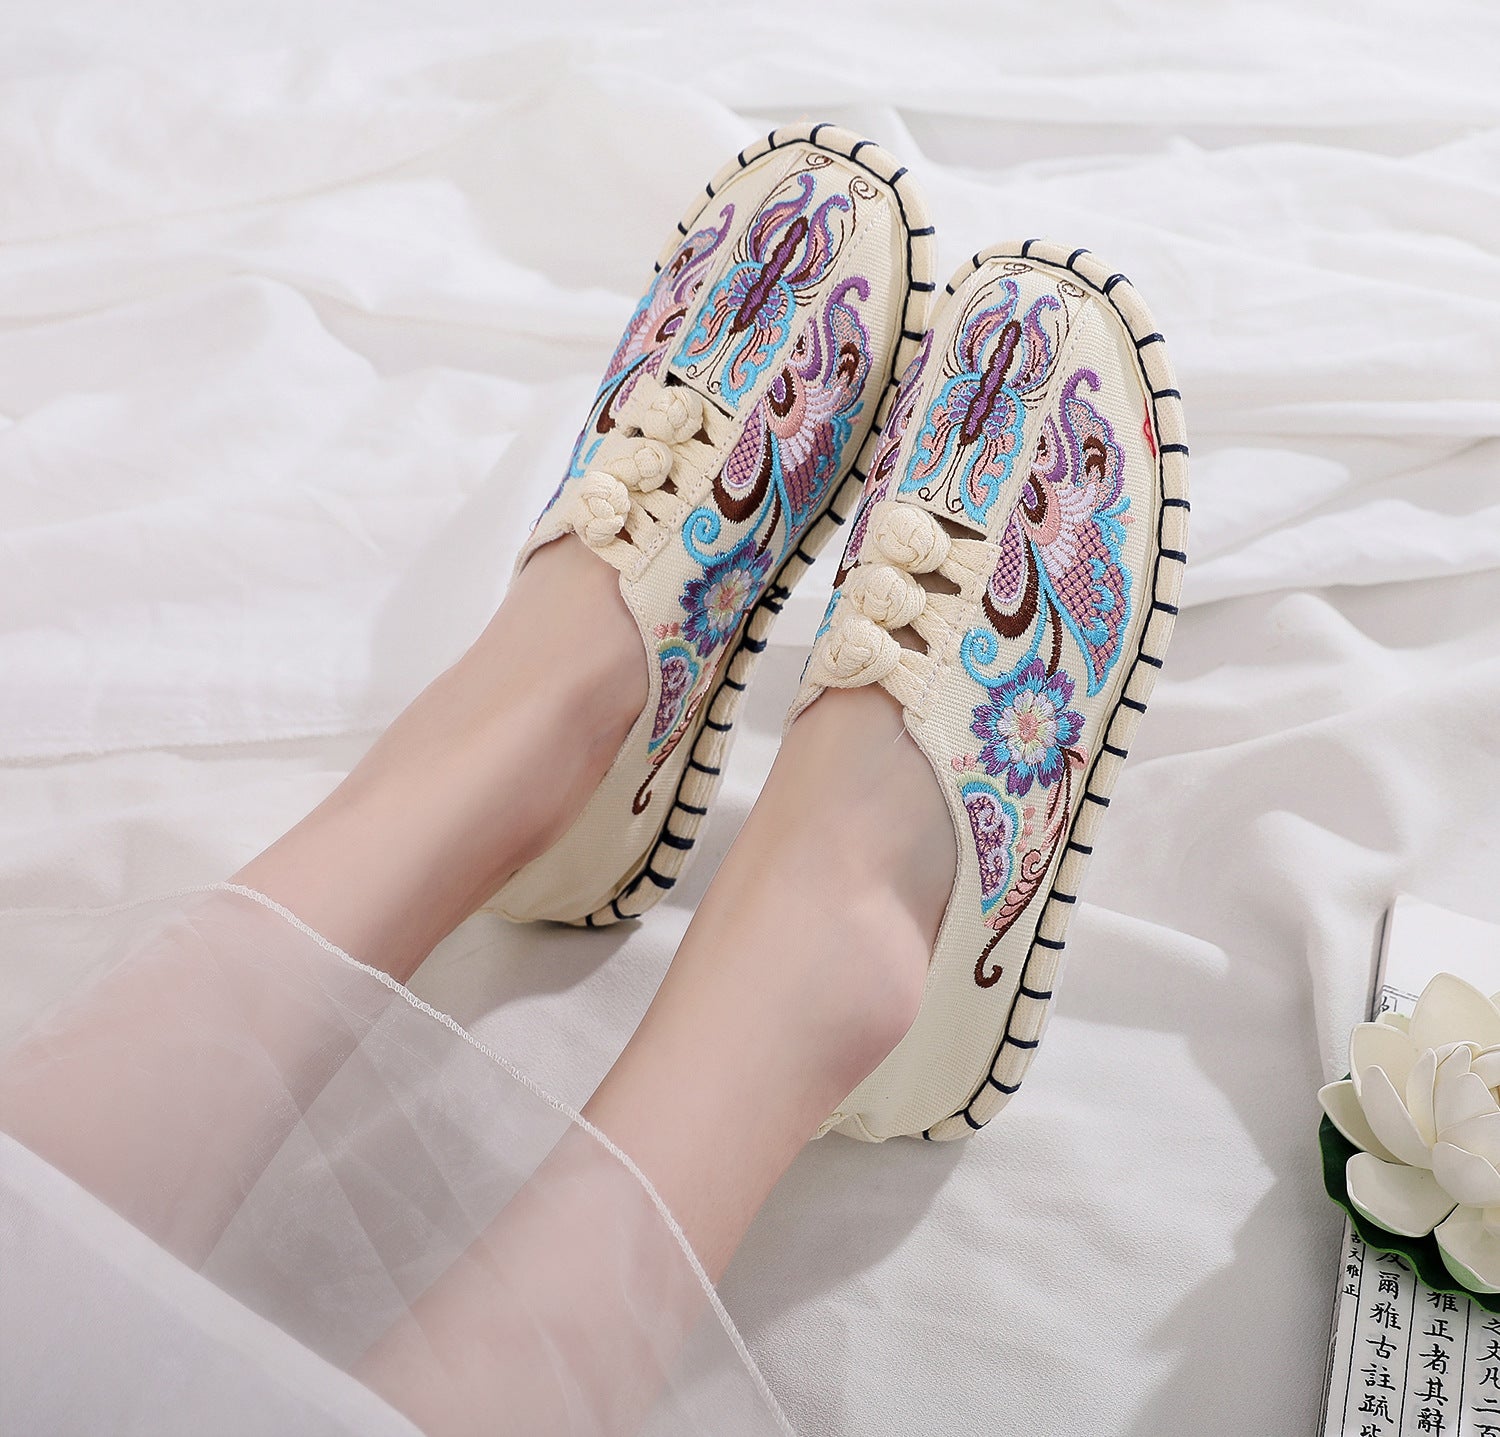 Women's Ethnic Style Old Beijing Cloth Strong Canvas Shoes